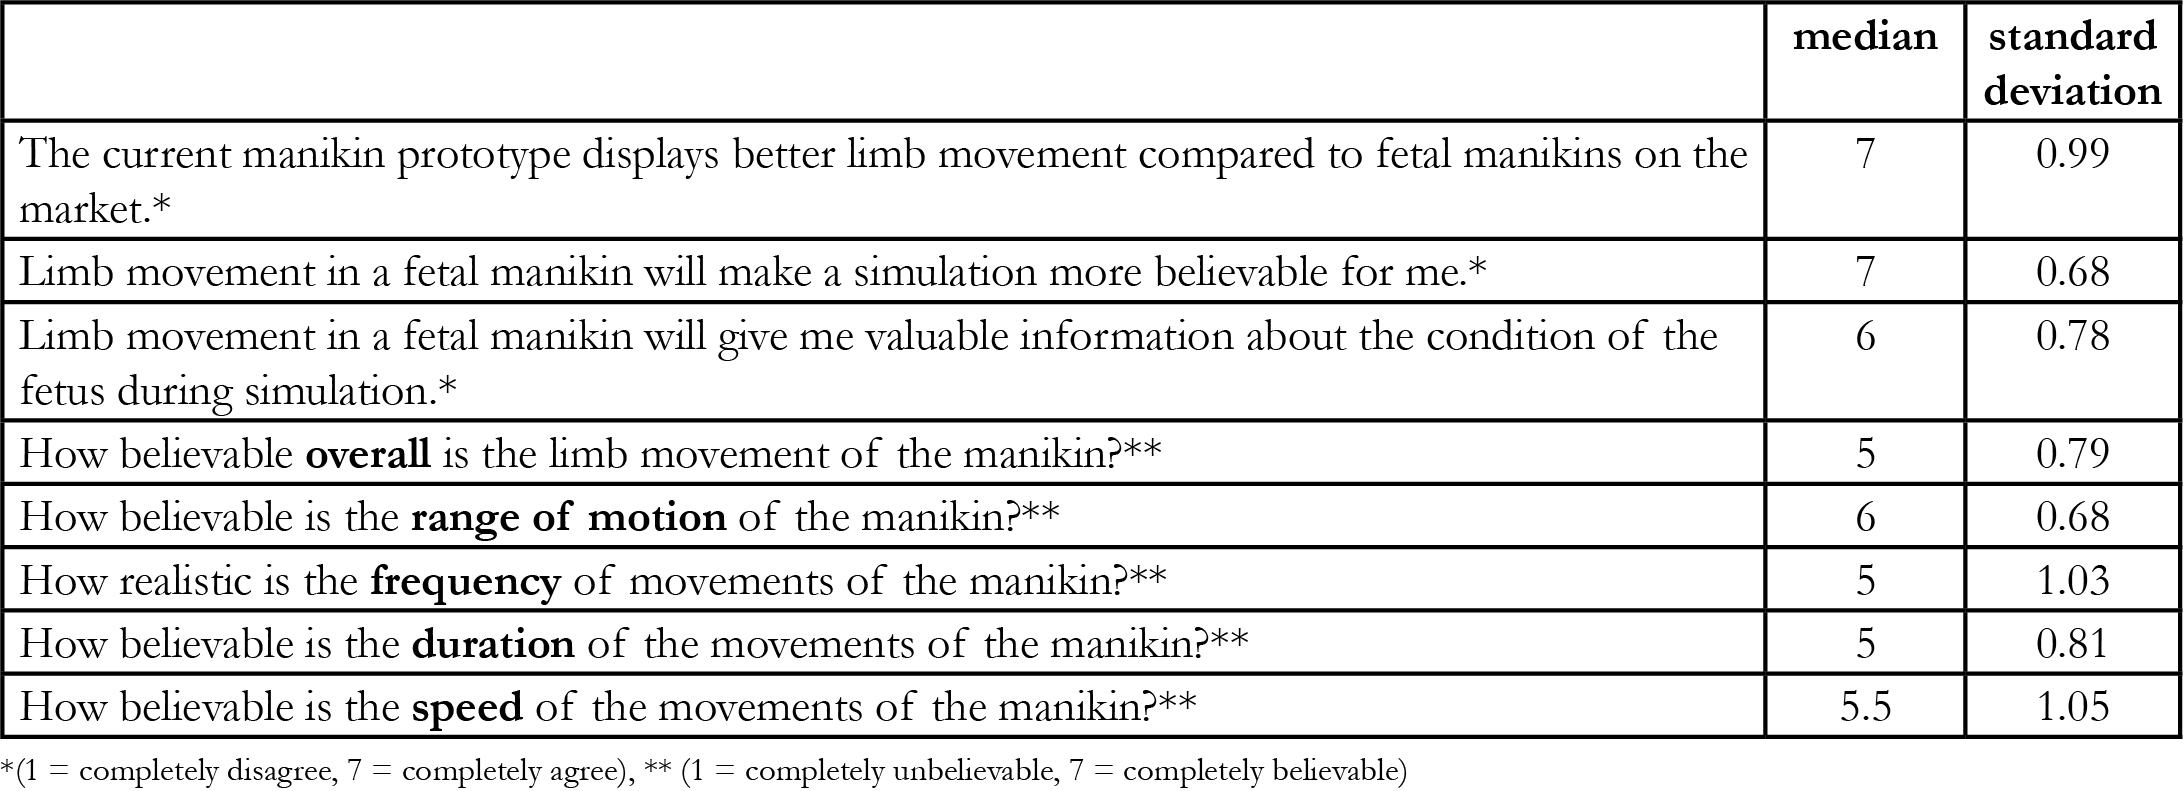 The questionnaire results for the validation study. Overall, the medical professionals were very positive about the prototype. They found limb compliance and range of motion realistic, but the realism of the movements as a whole could use improvement.